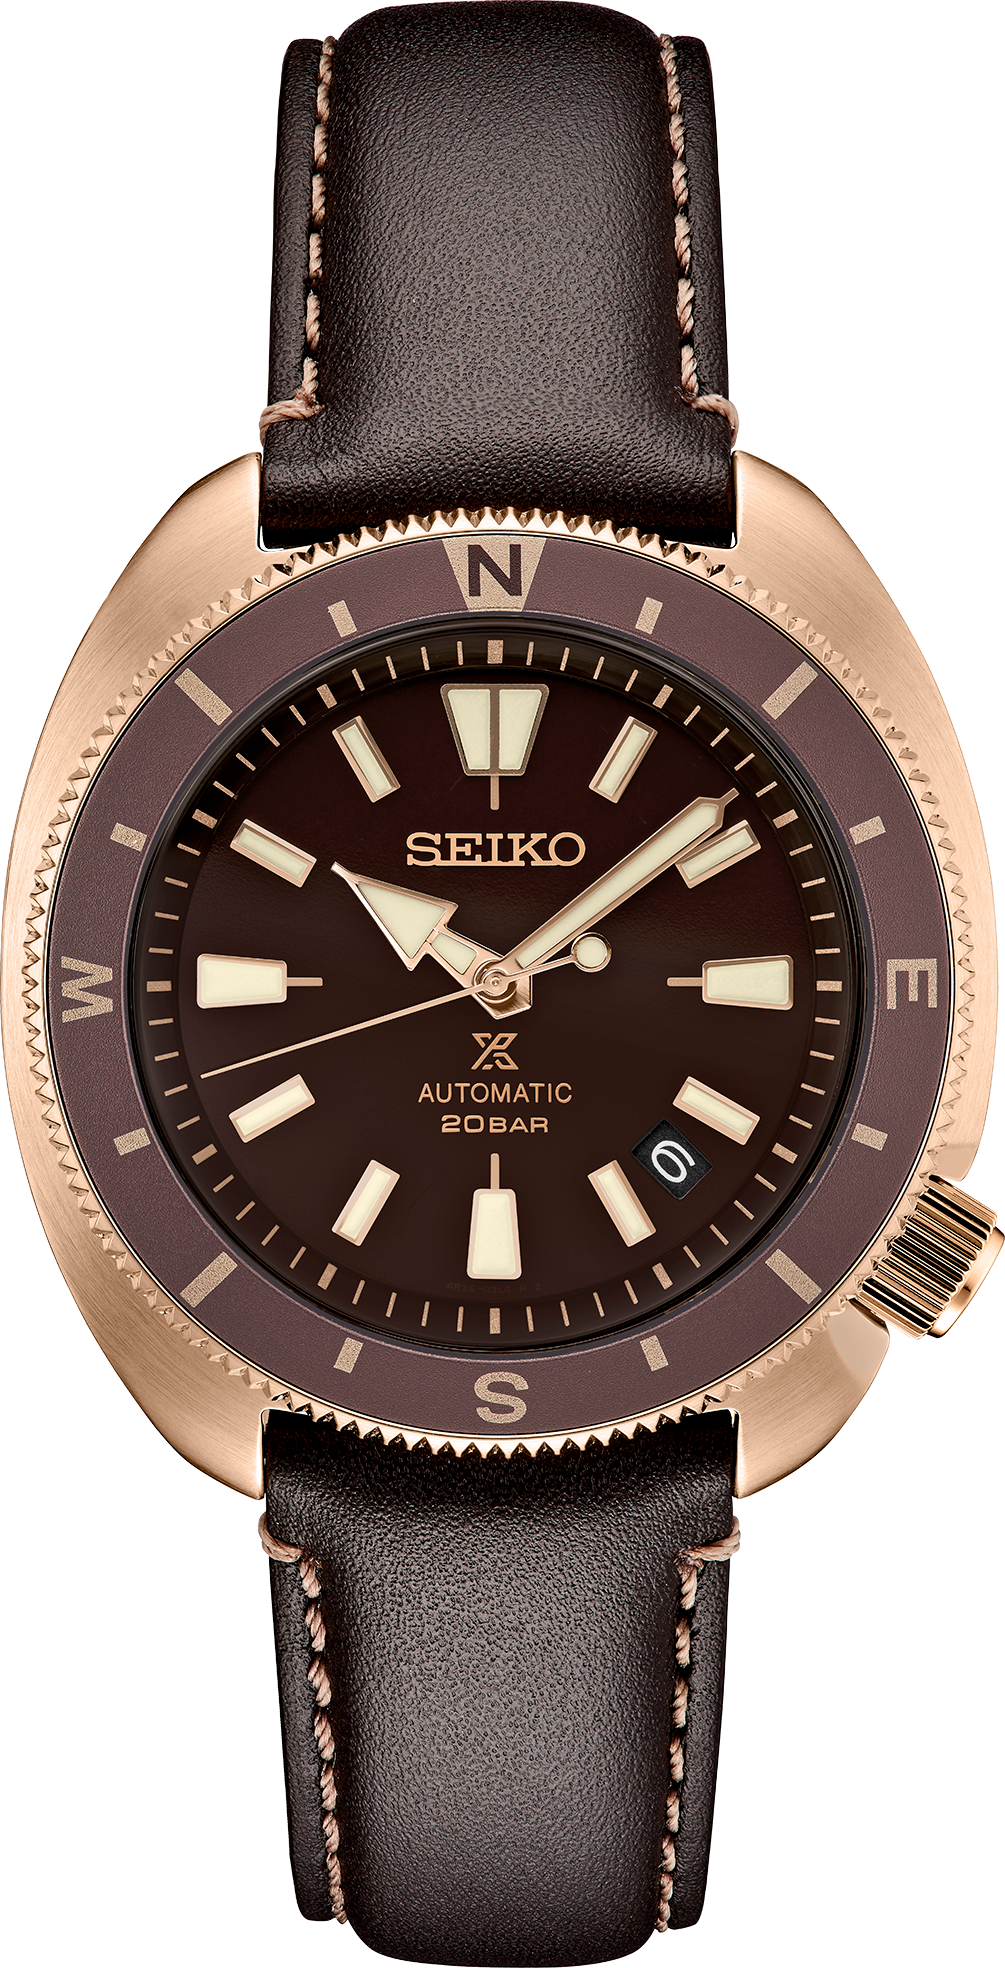 Seiko SRPG18 Prospex Land Brown Dial Leather Strap Automatic Watch